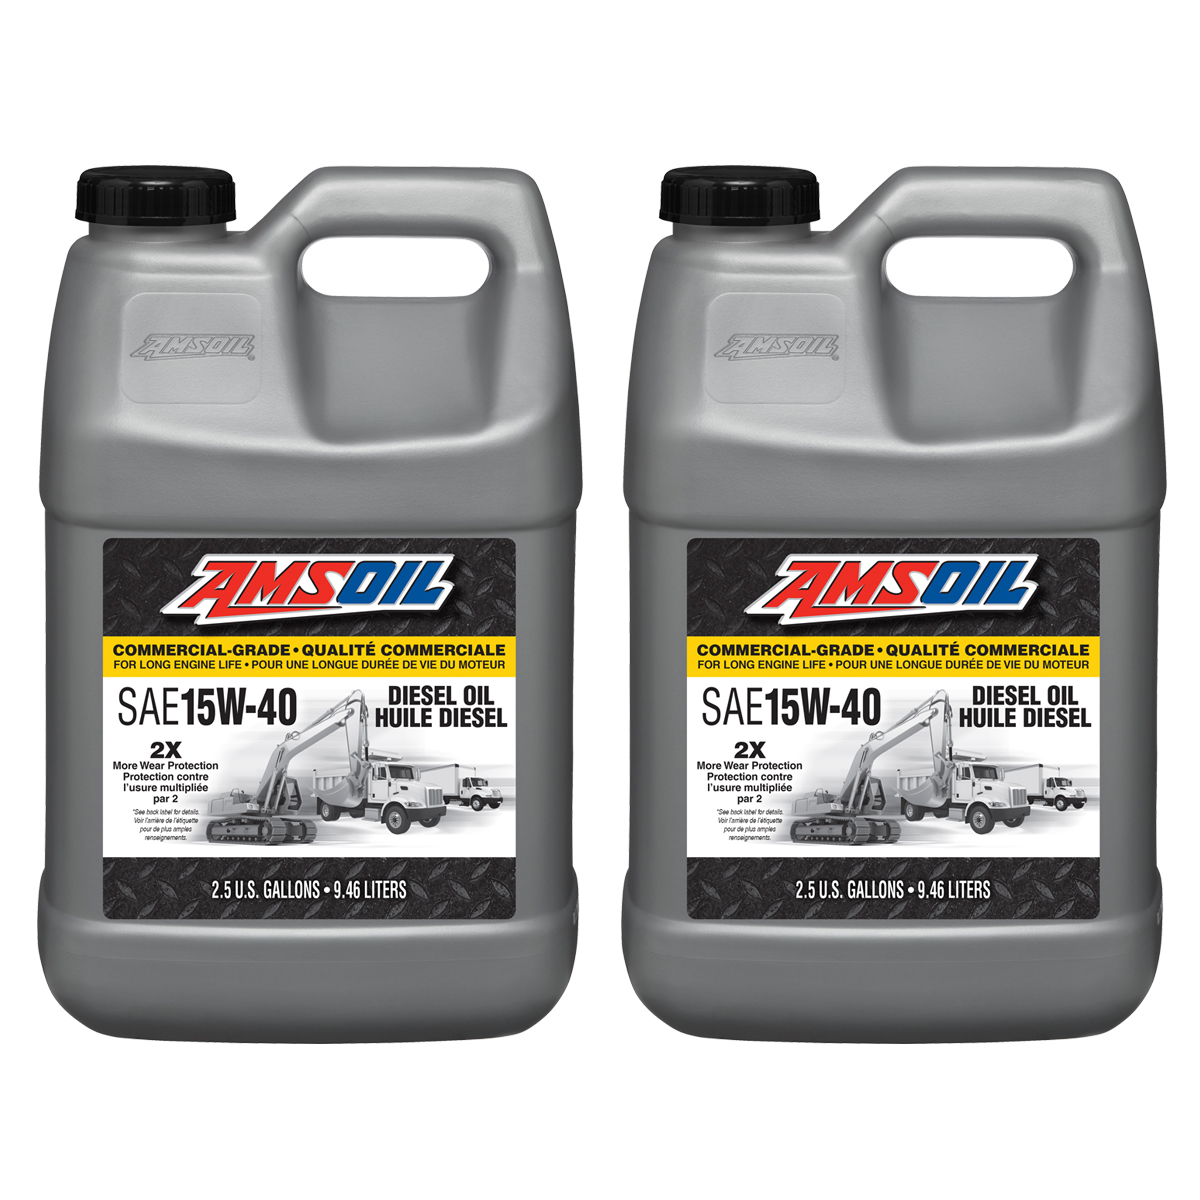 AMSOIL 15W-40 Diesel two and a half gallons. Case of two